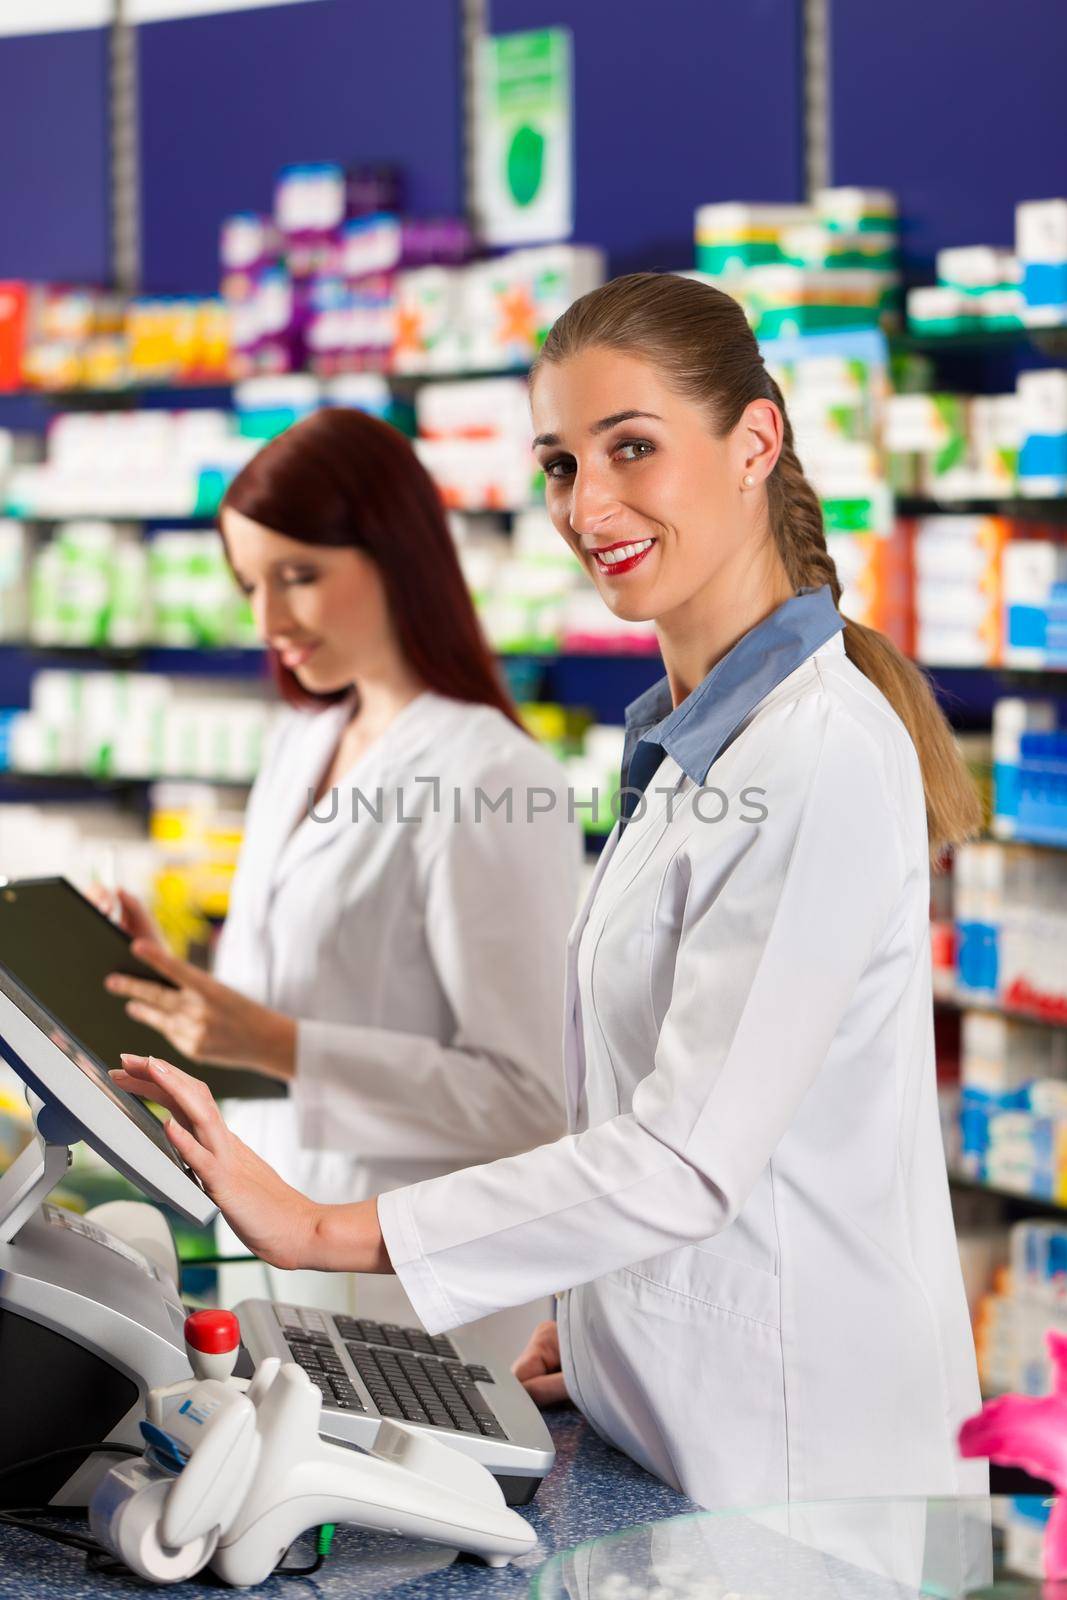 Pharmacist with assistant in pharmacy by Kzenon